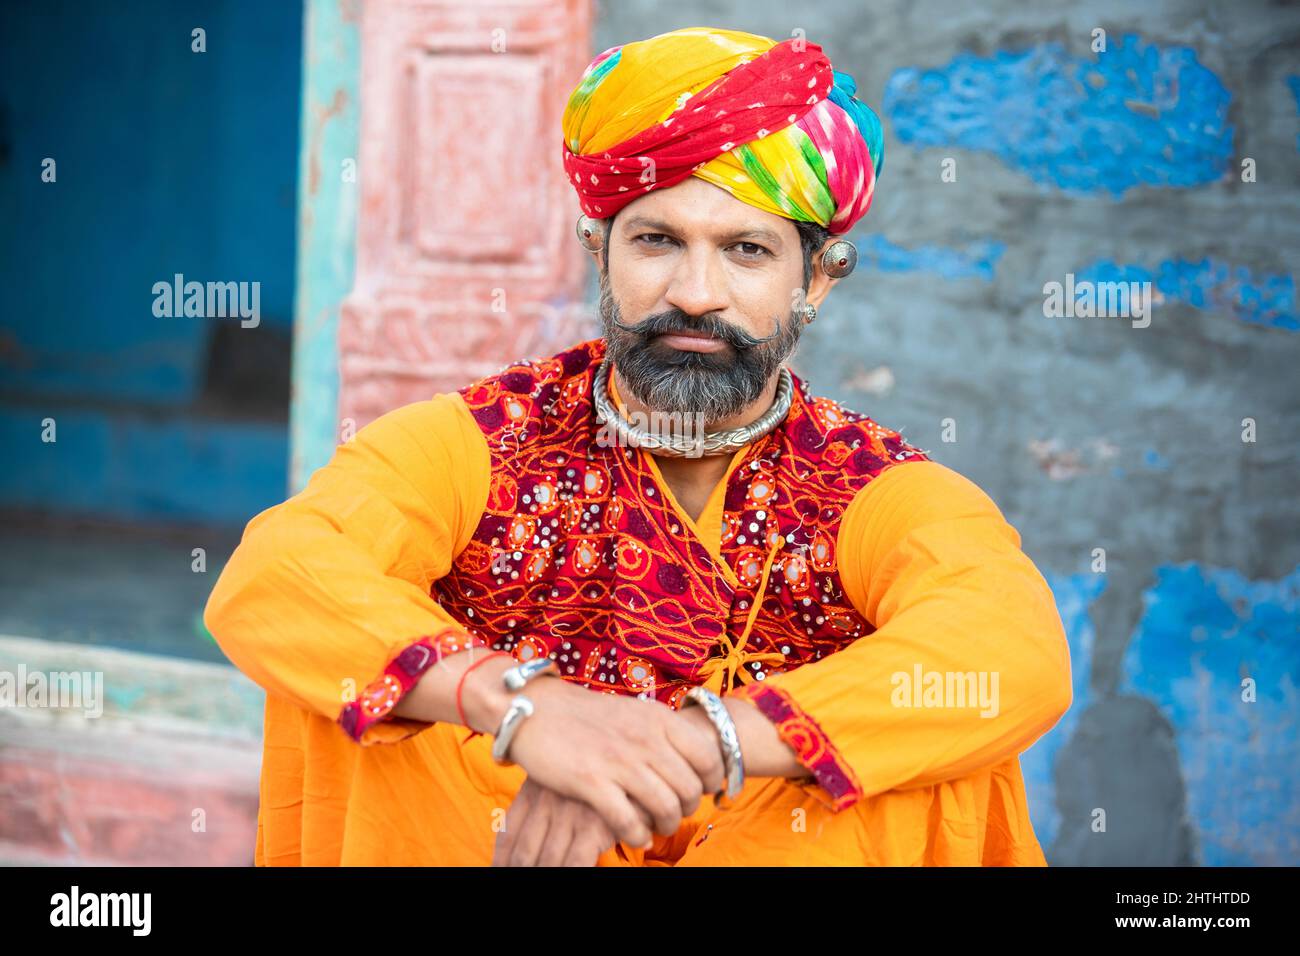 Portrait of happy traditional north indian man wearing colorful attire sitting. Smiling Rajasthan male with turban and ethnic outfits. Culture and fas Stock Photo